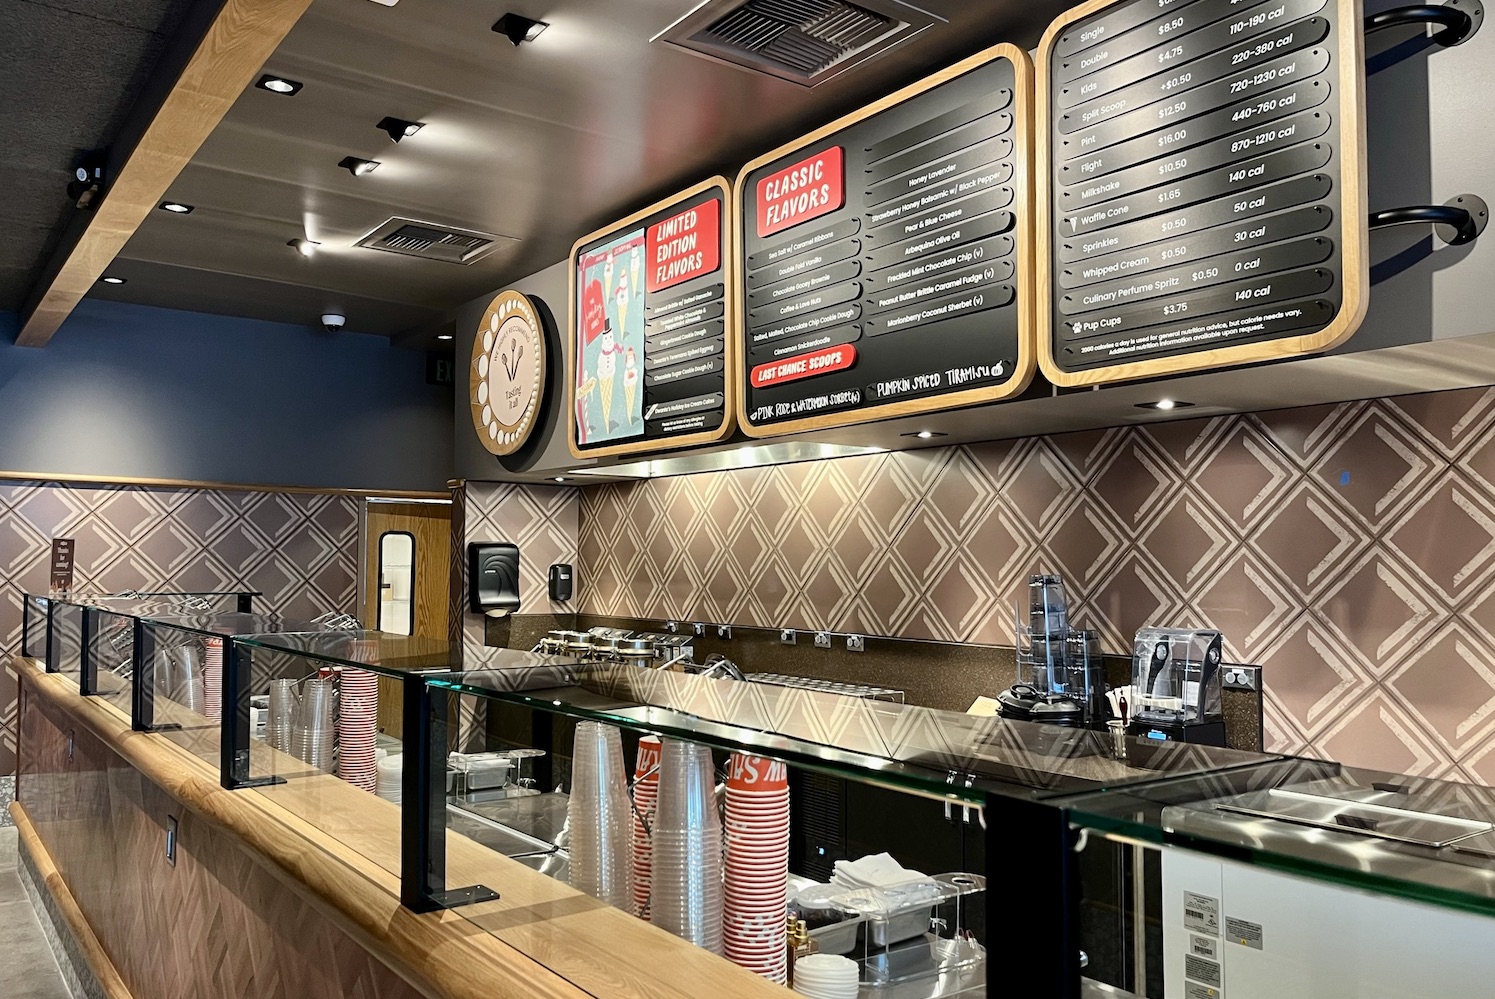 Interior of Salt & Straw, showing a long counter with hanging menus 